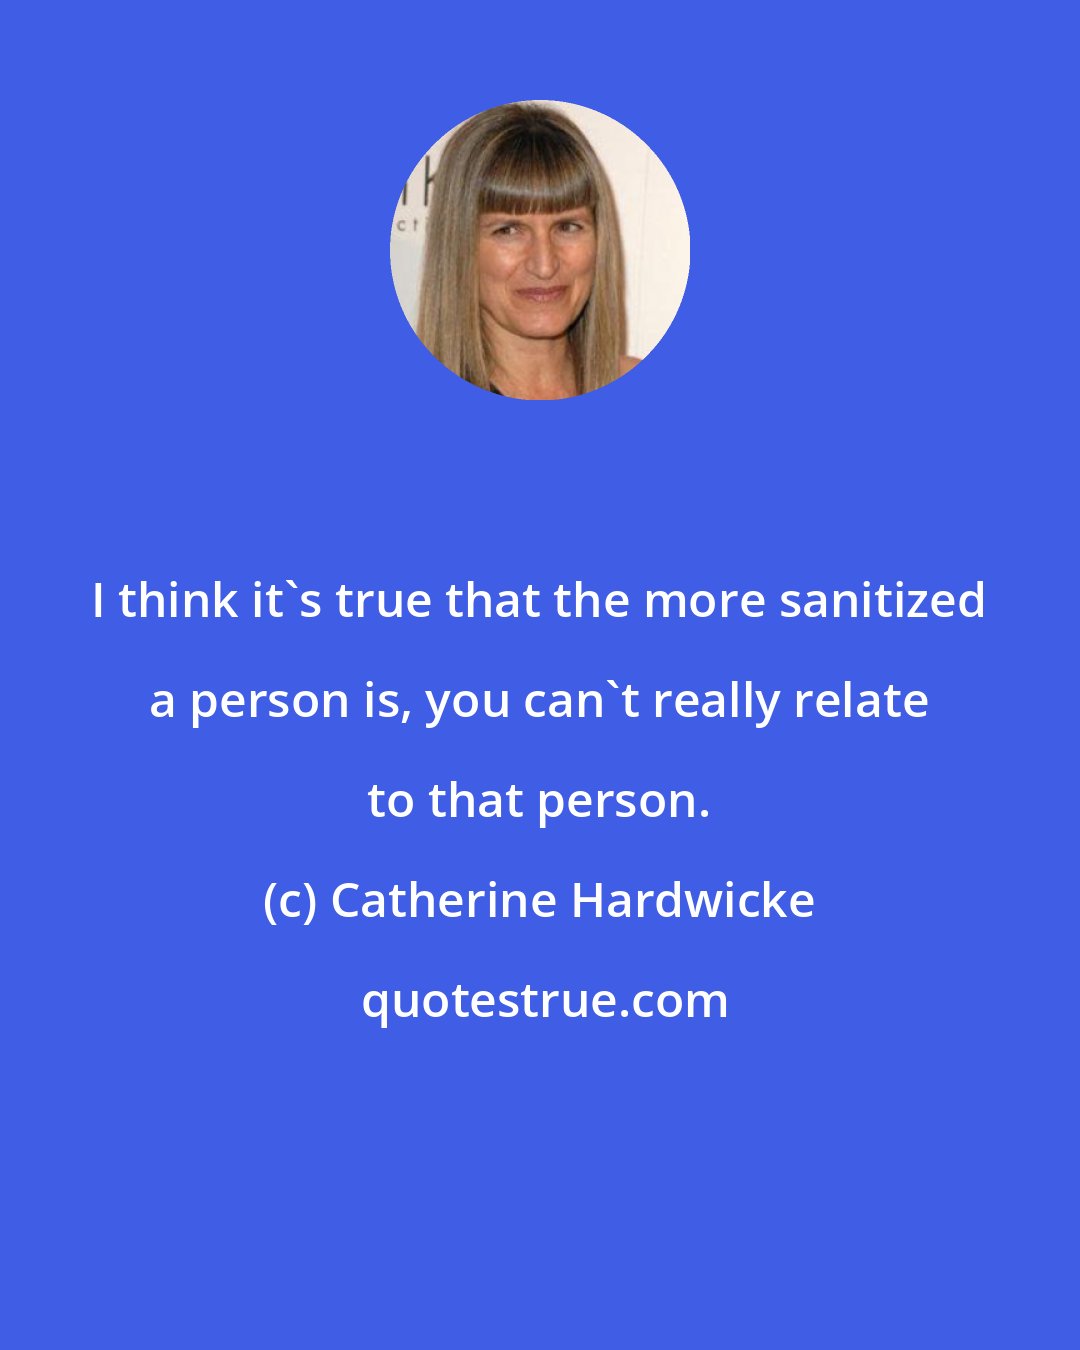 Catherine Hardwicke: I think it's true that the more sanitized a person is, you can't really relate to that person.